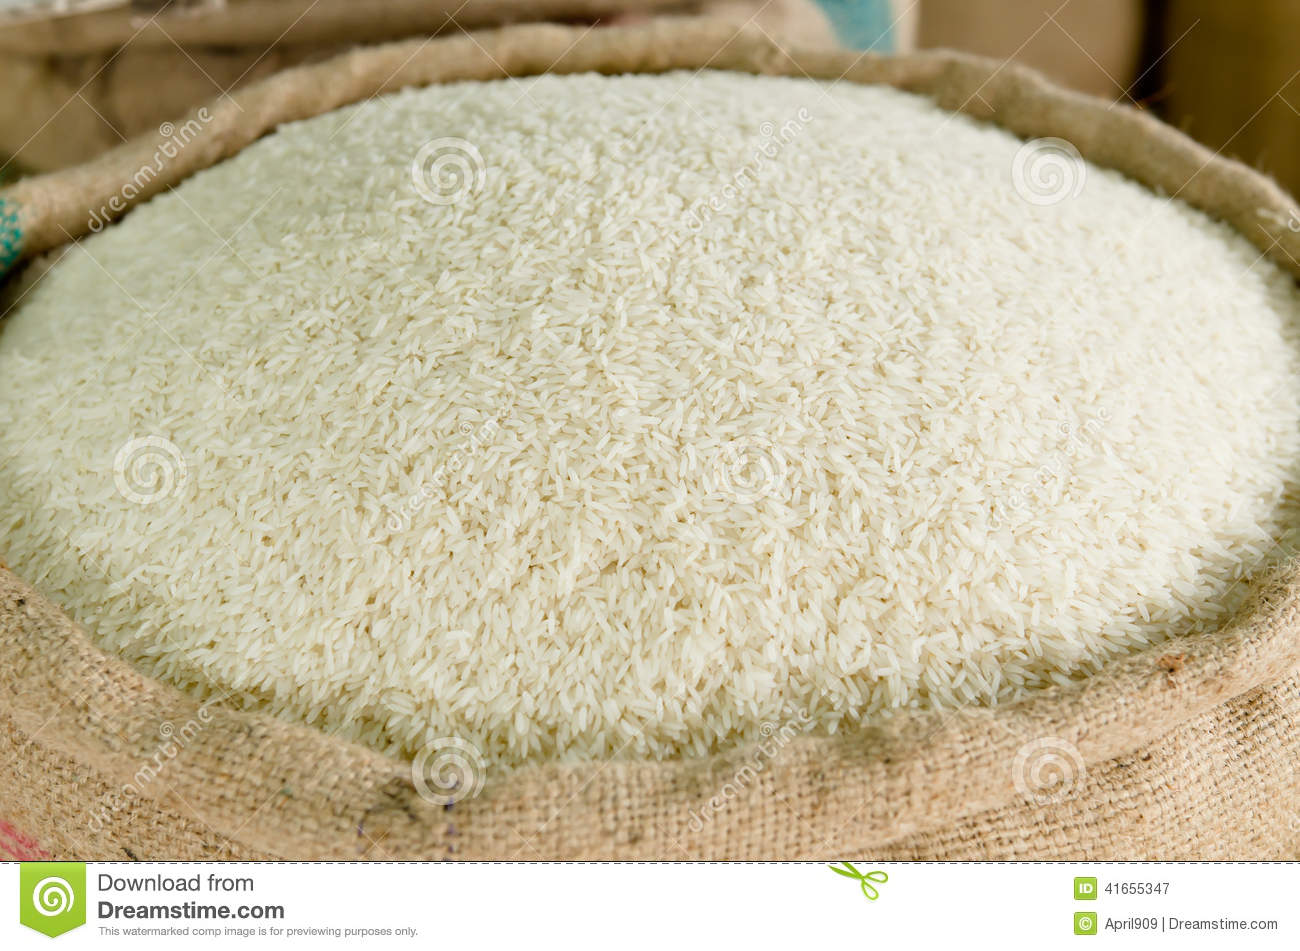 Rice In A Sack Stock Photo   Image  41655347